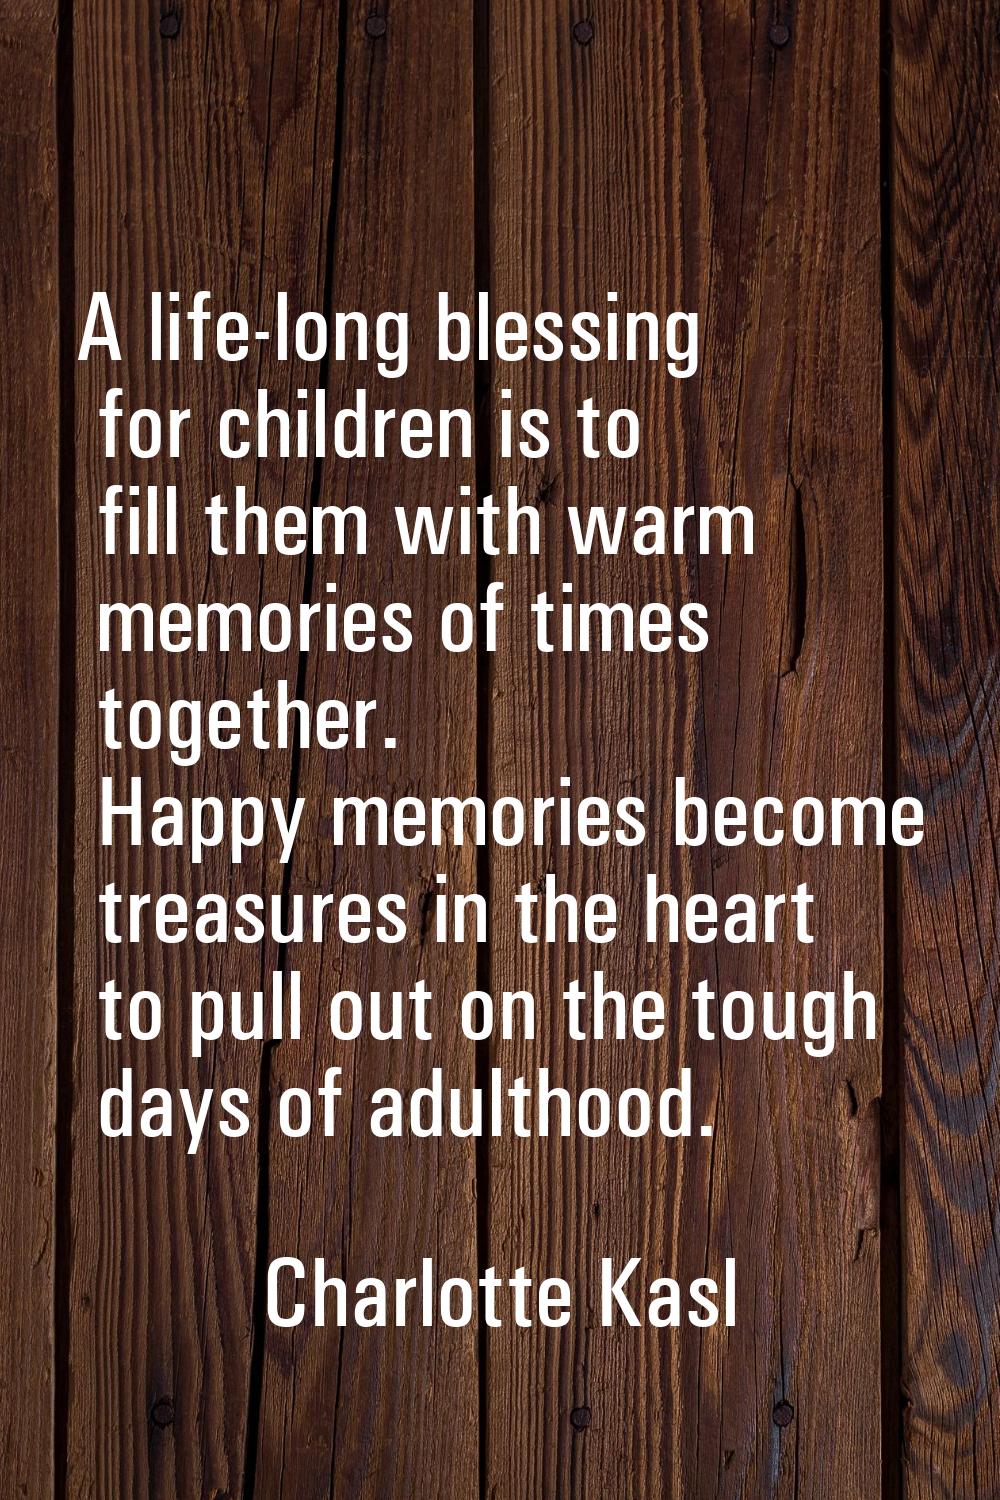 A life-long blessing for children is to fill them with warm memories of times together. Happy memor